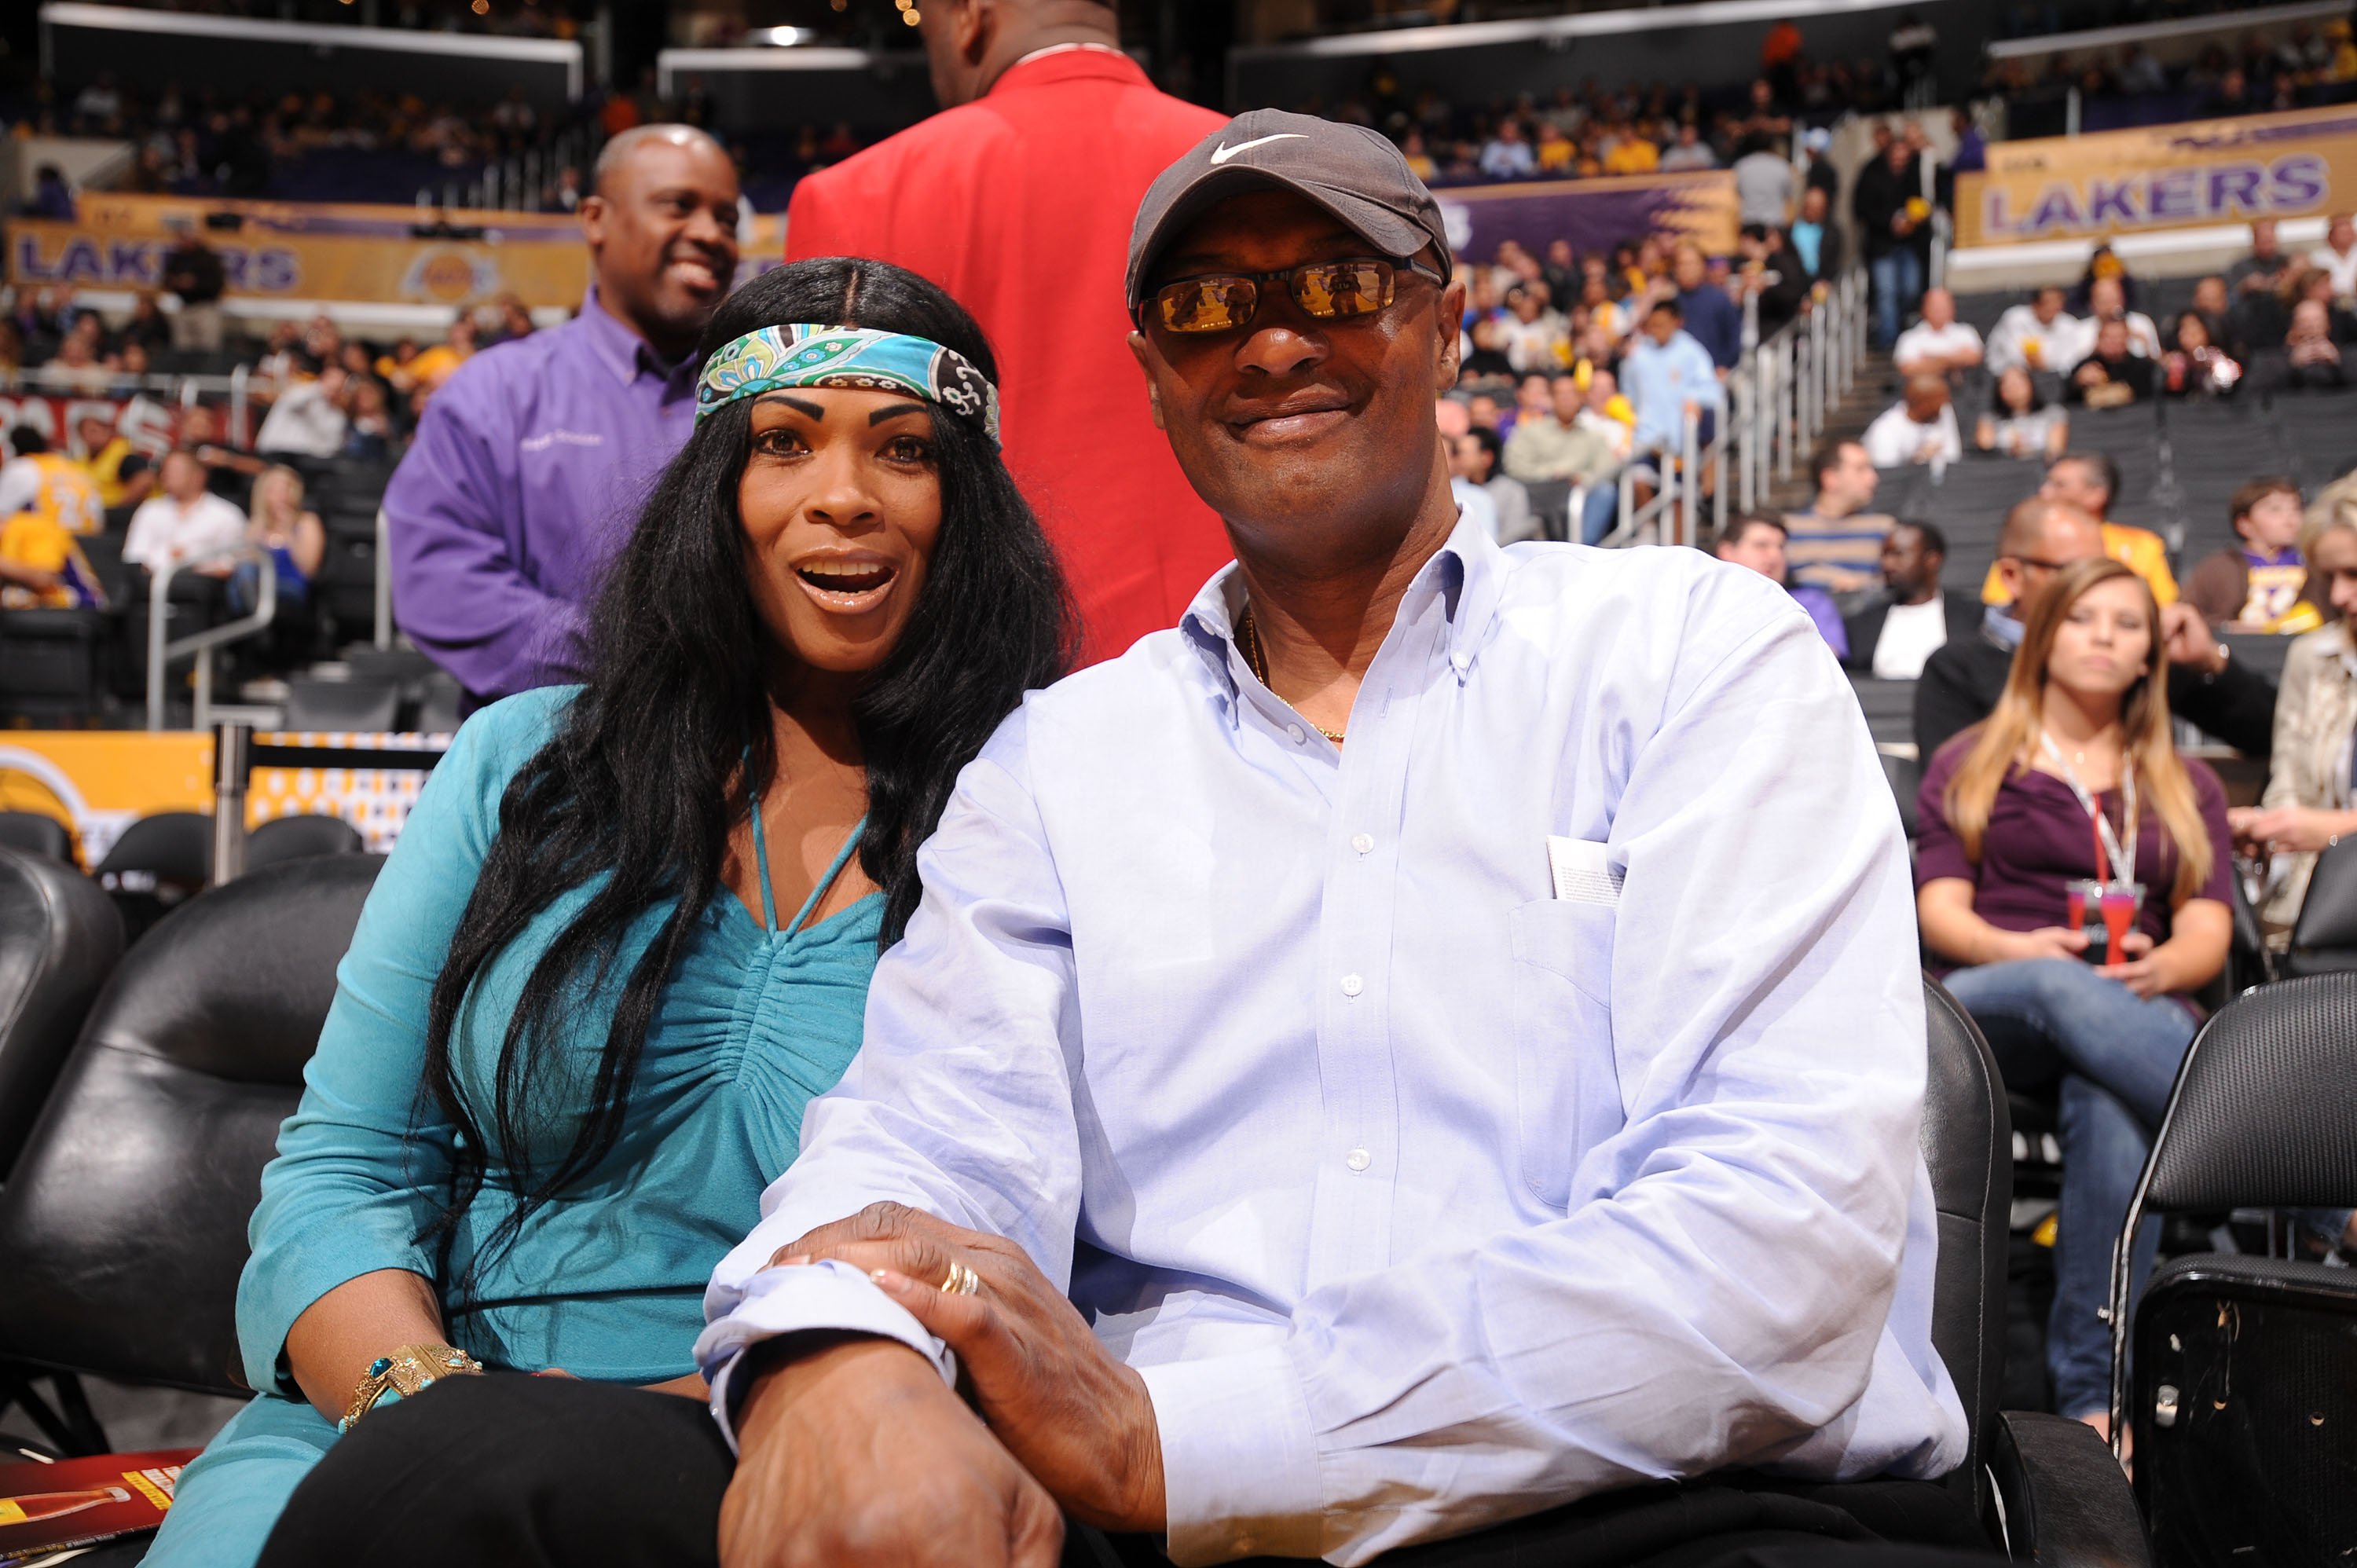 Pam and Joe Bryant at a game between the Oklahoma City Thunder and the Los Angeles Lakers on April 27, 2010 in California | Photo: Getty Images